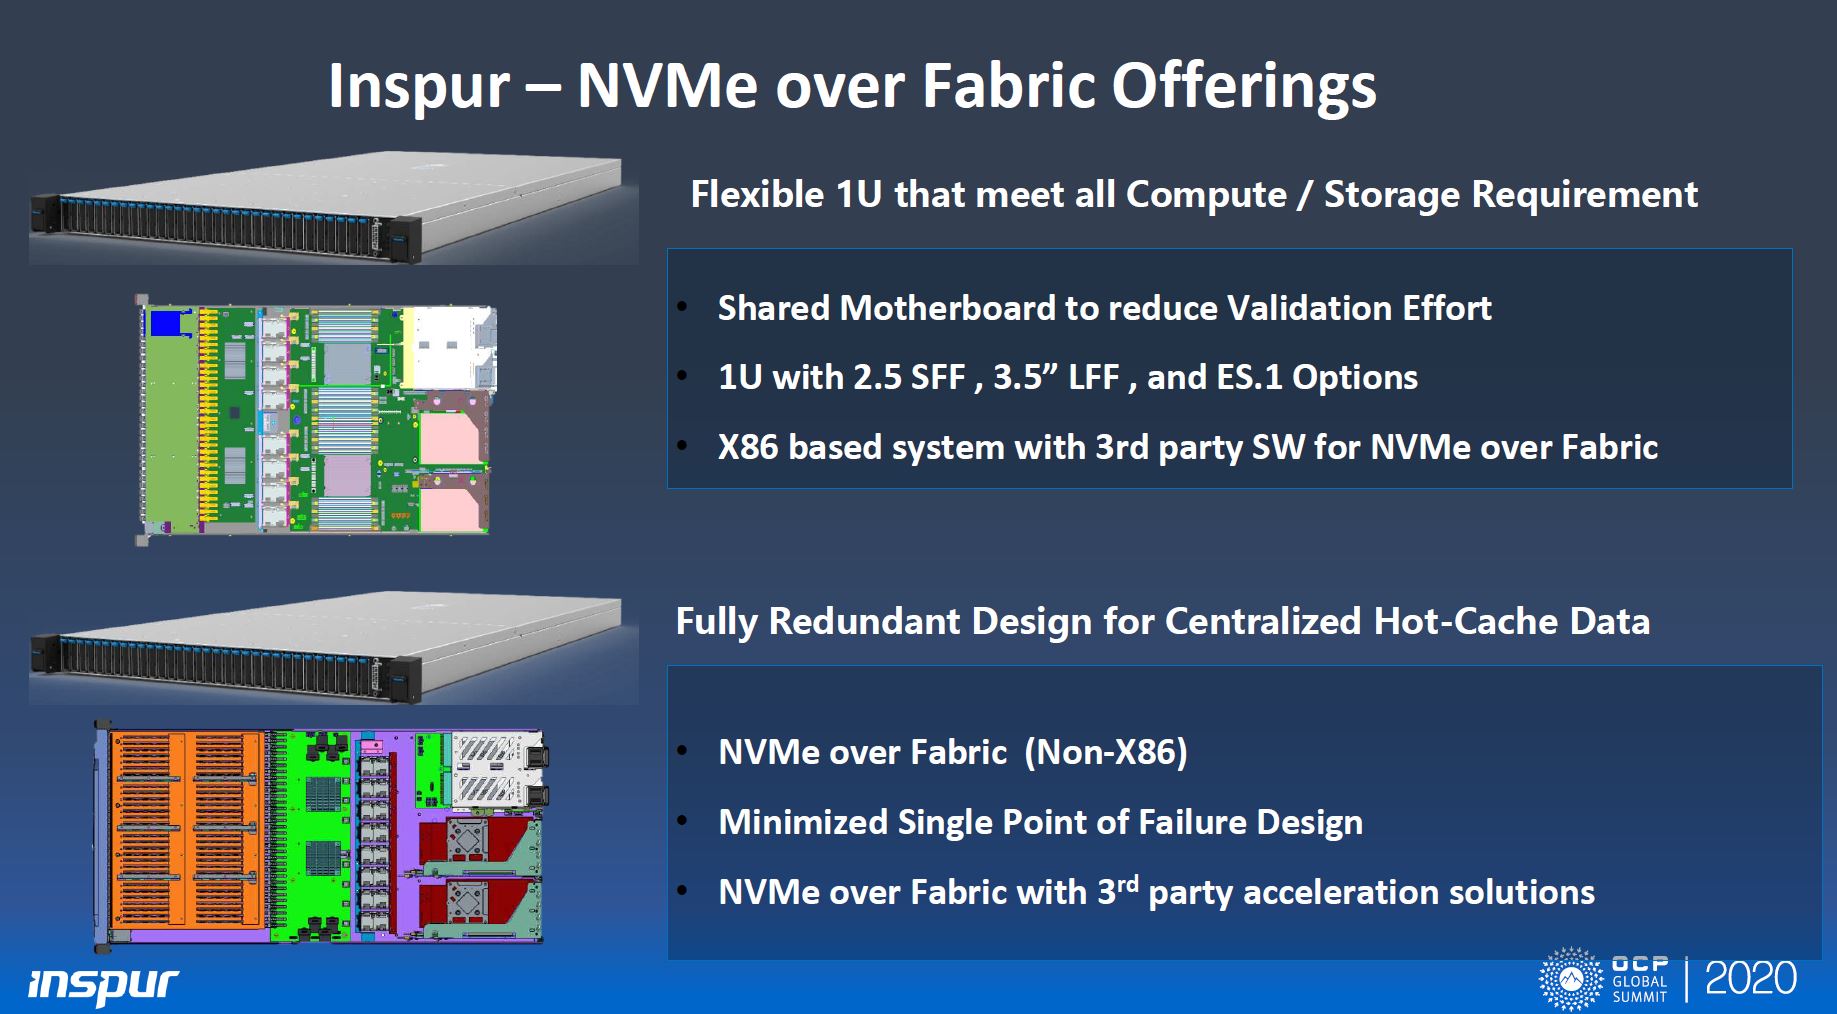 Inspur 1U Open Hardware Platform For Compute And Storage NVMeoF Offerings